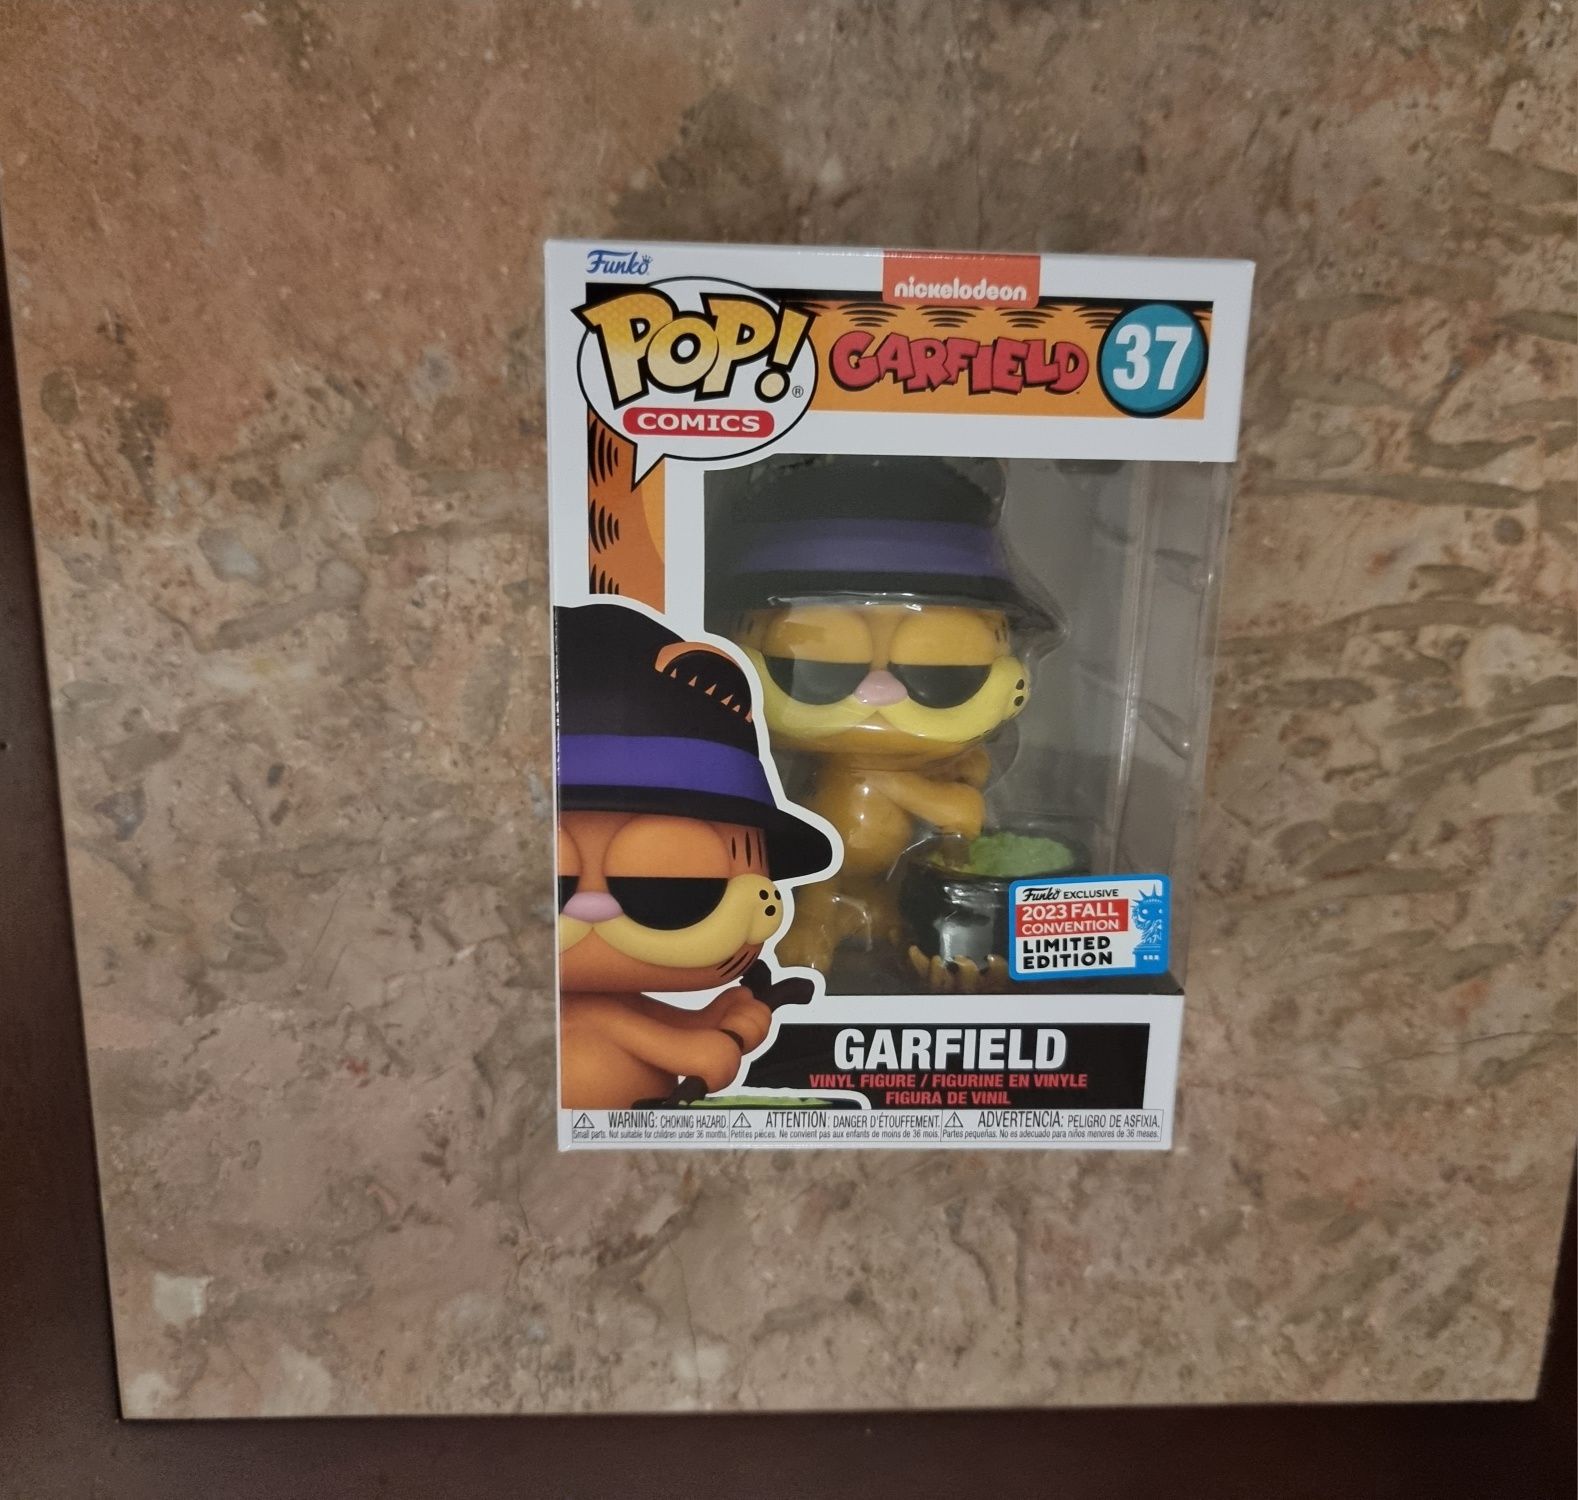 Funko pop 37 : Garfield (2023 fall convention / limited edition)